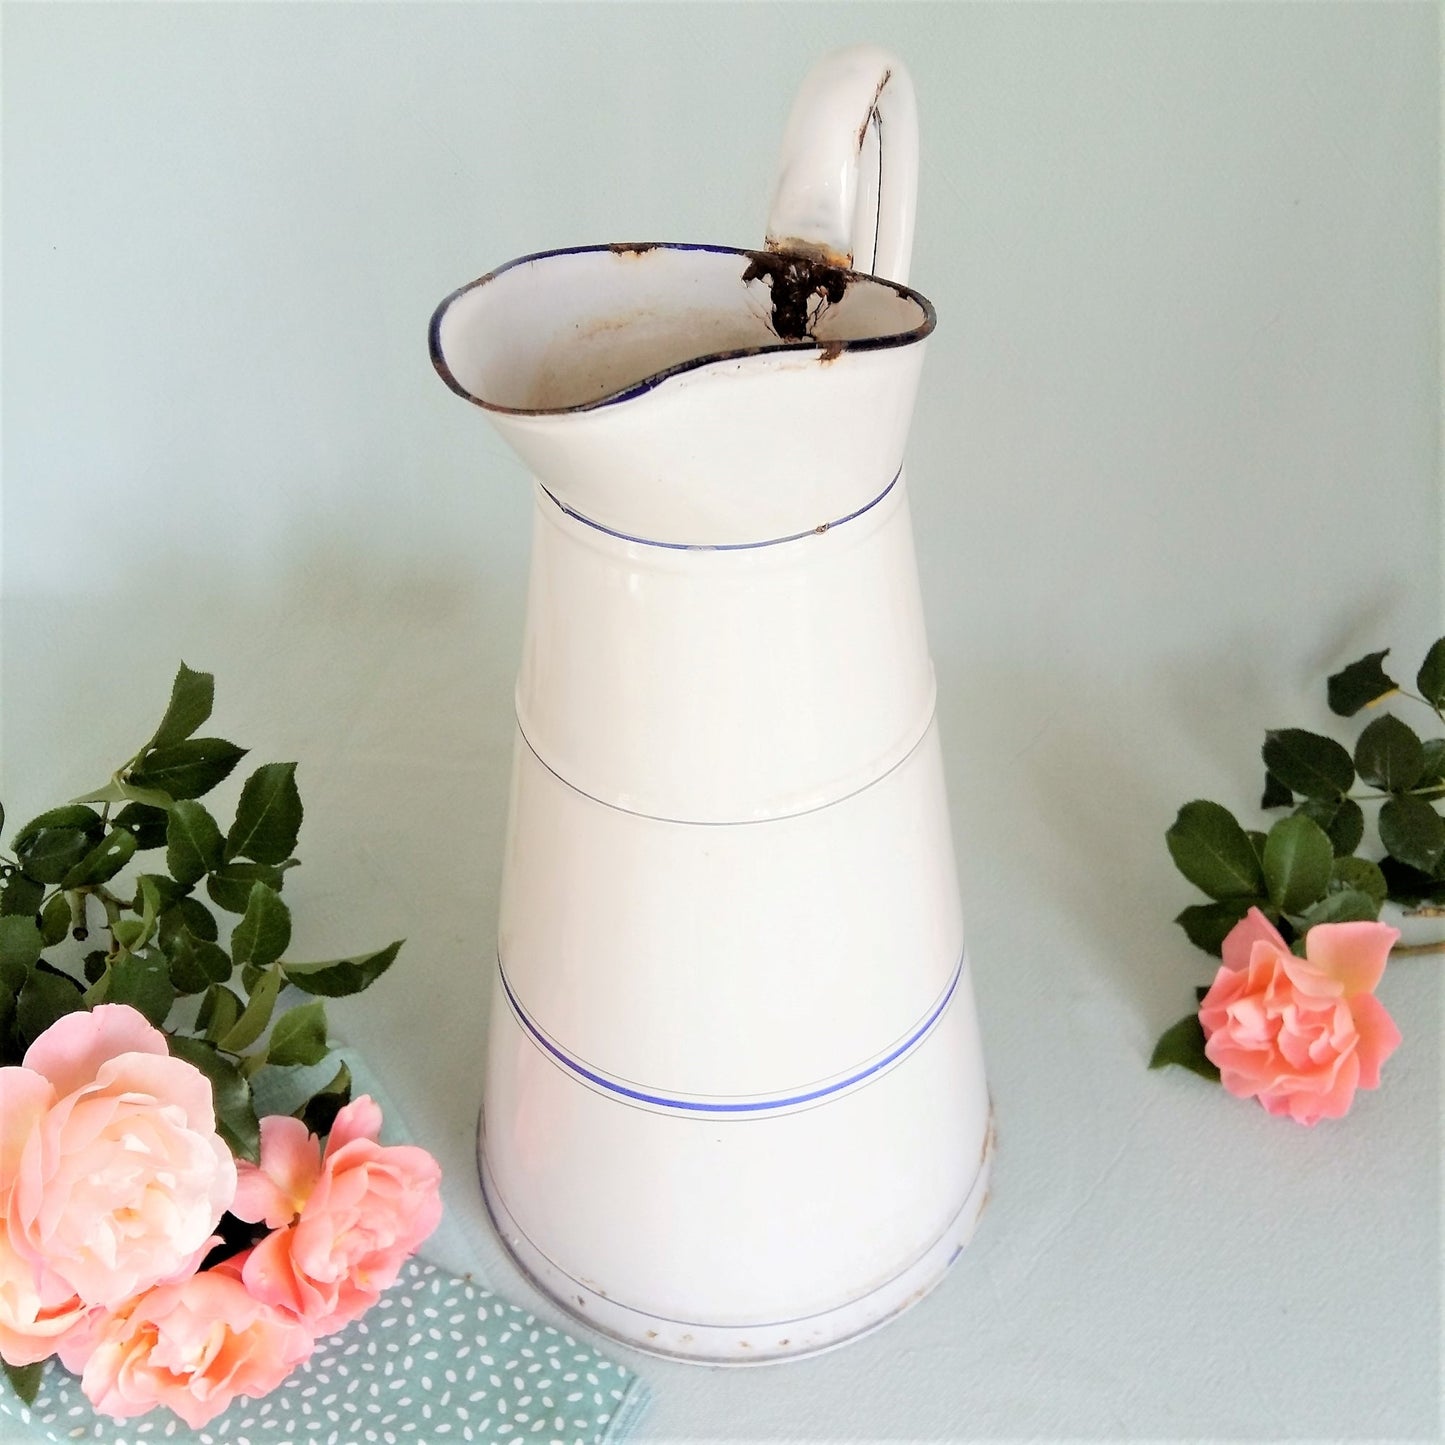 Large antique white enamel pitcher from Tiggy & Pip - Just €129! Shop now at Tiggy and Pip